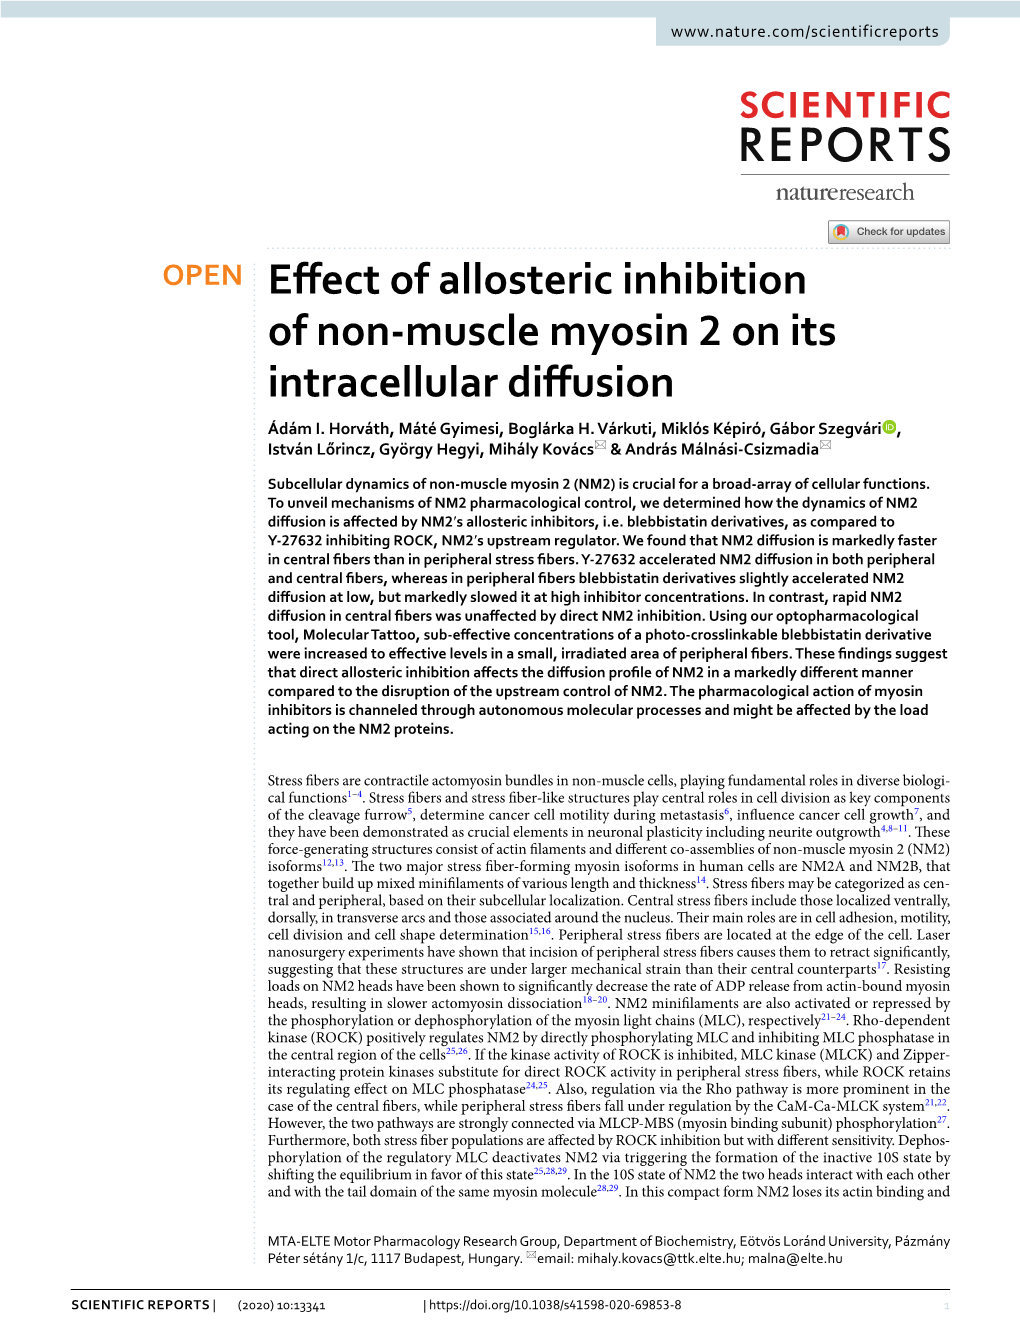 Effect of Allosteric Inhibition of Non-Muscle Myosin 2 on Its